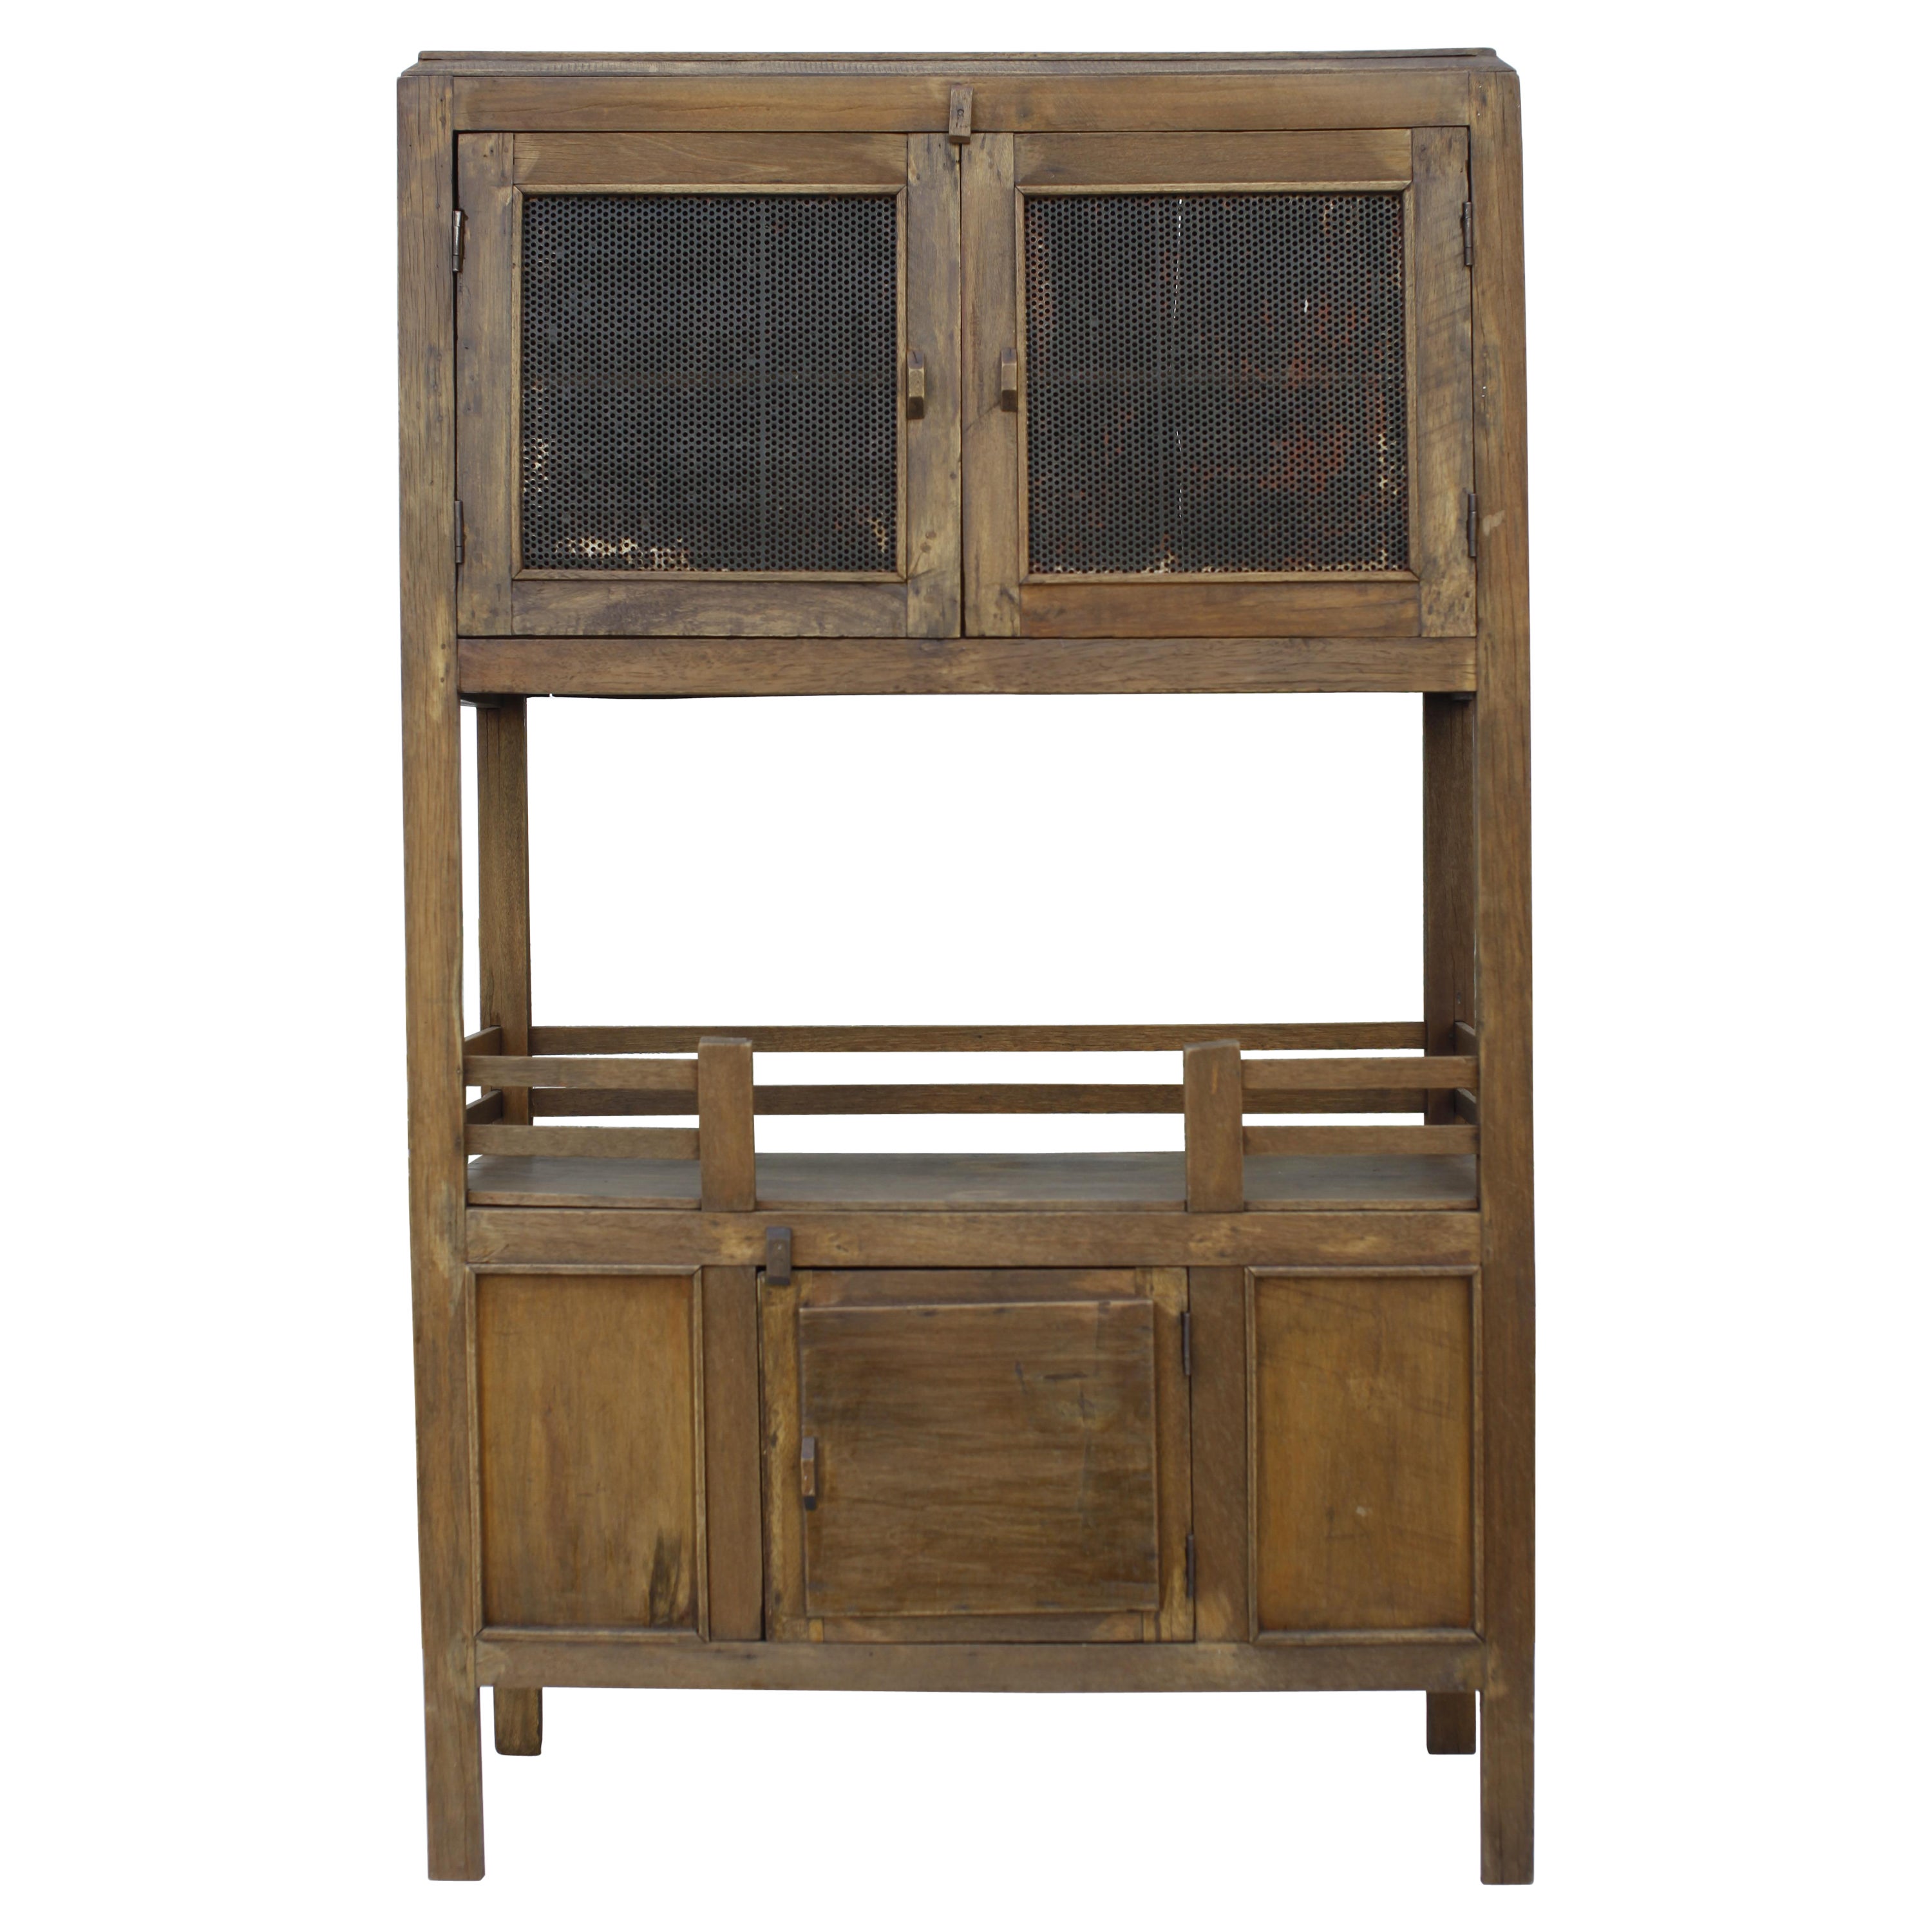 French Colonial Weathered Teak Cabinet with Metal Screen Doors 1930's For Sale